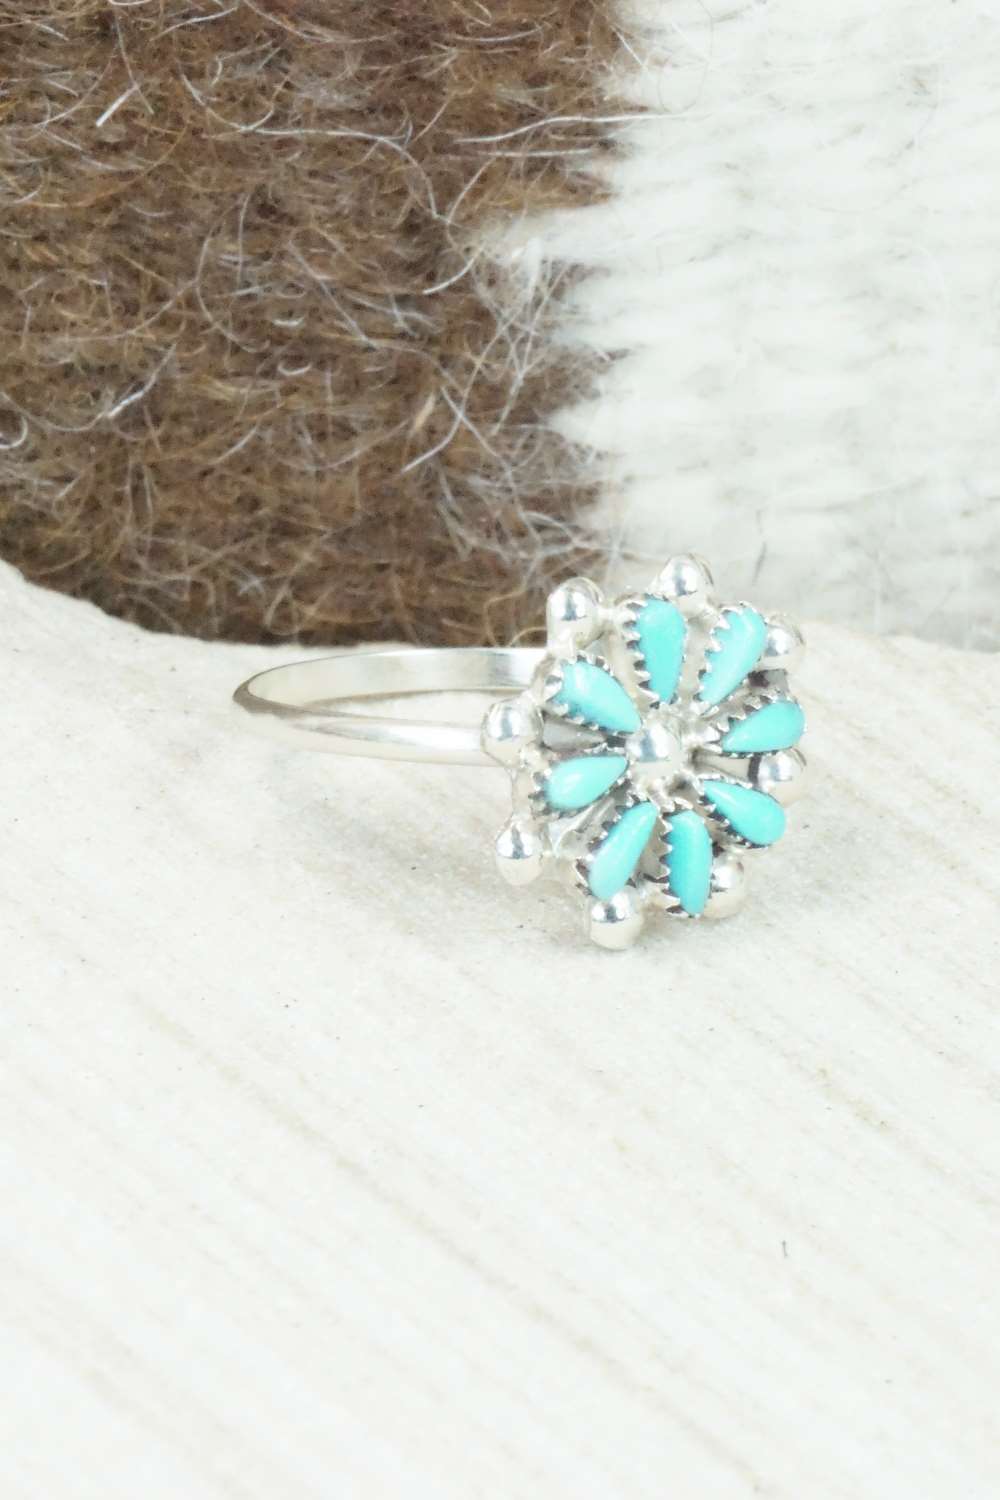 Turquoise & Sterling Silver Ring - David Leekity - Size 8.75